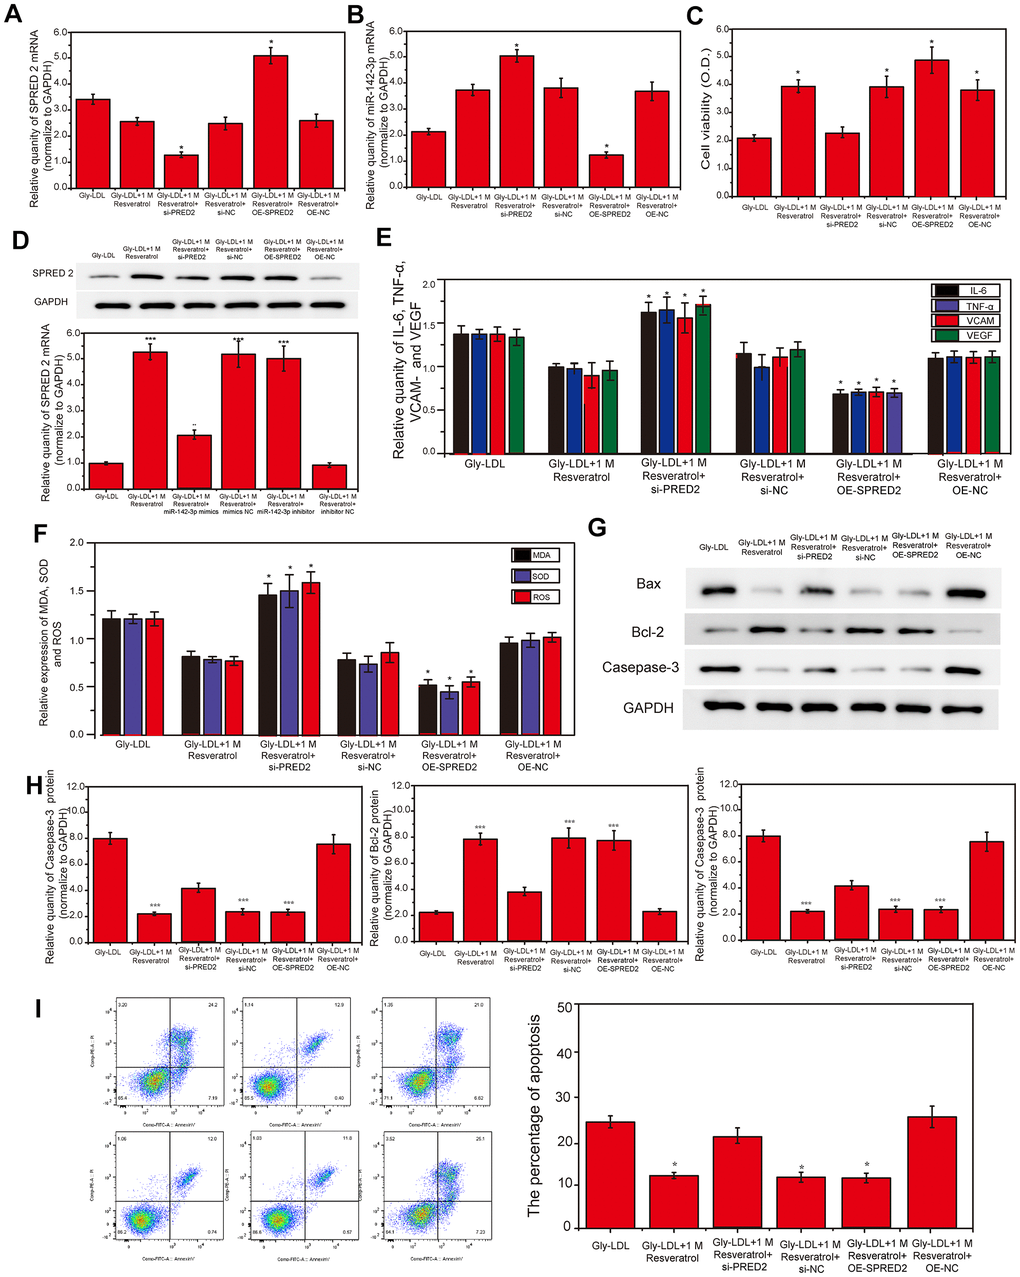 Inhibition of SPRED2 reverses the effect of resveratrol on Gly-LDL-induced HUVEC cell proliferation, apoptosis, inflammatory factor secretion and oxidative stress. (A, B) PCR result of overexpression of miR-142-3p and SPRED2. (C) Cell viability of each group was tested by MTT. (D) The expression of SPRED2 in all groups by western blotting. (E) The expression of inflammatory factors IL-6, TNF-α, VCAM- and VEGF. (F) The expression of oxidative stress factors MDA, SOD and ROS. (G) The expression of caspase-3, BAX and BCL-2 in all groups by western blotting. (H) Statistical analysis of Western blotting results. (I) The apoptosis of all groups was detected by flow cytometry, and statistical analysis of flow cytometry results. *, P 